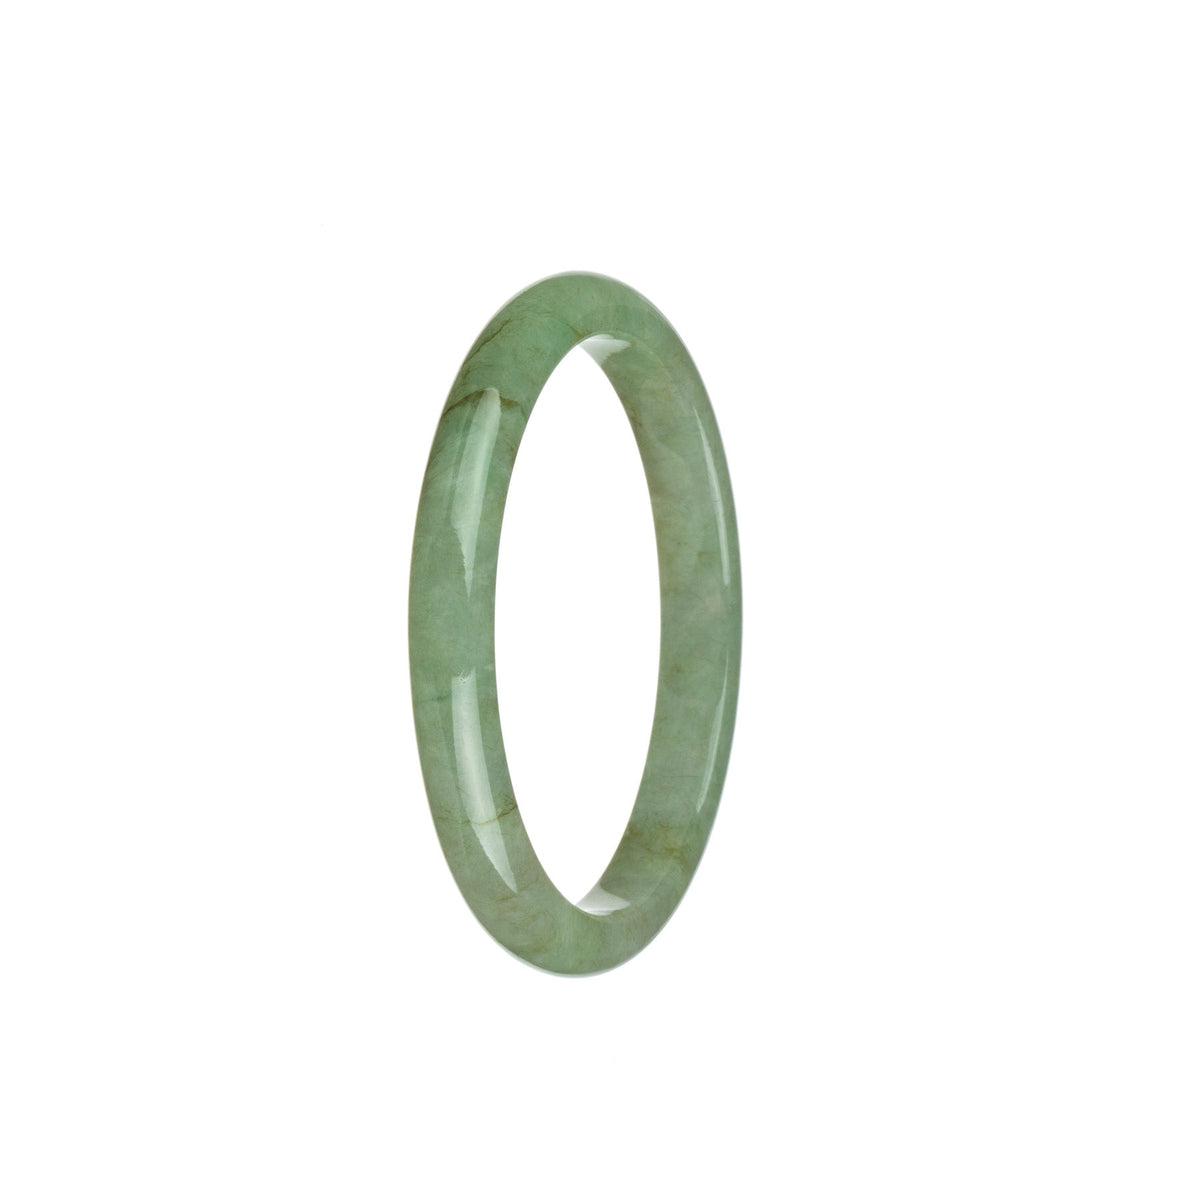 A close-up image of a beautiful and elegant certified natural light green jadeite bangle bracelet. The bracelet has a semi-round shape and measures approximately 54mm in diameter. It features a stunning light green color, signifying its high-quality jadeite gemstone. This bracelet is an exquisite piece of jewelry, perfect for adding a touch of sophistication to any outfit.